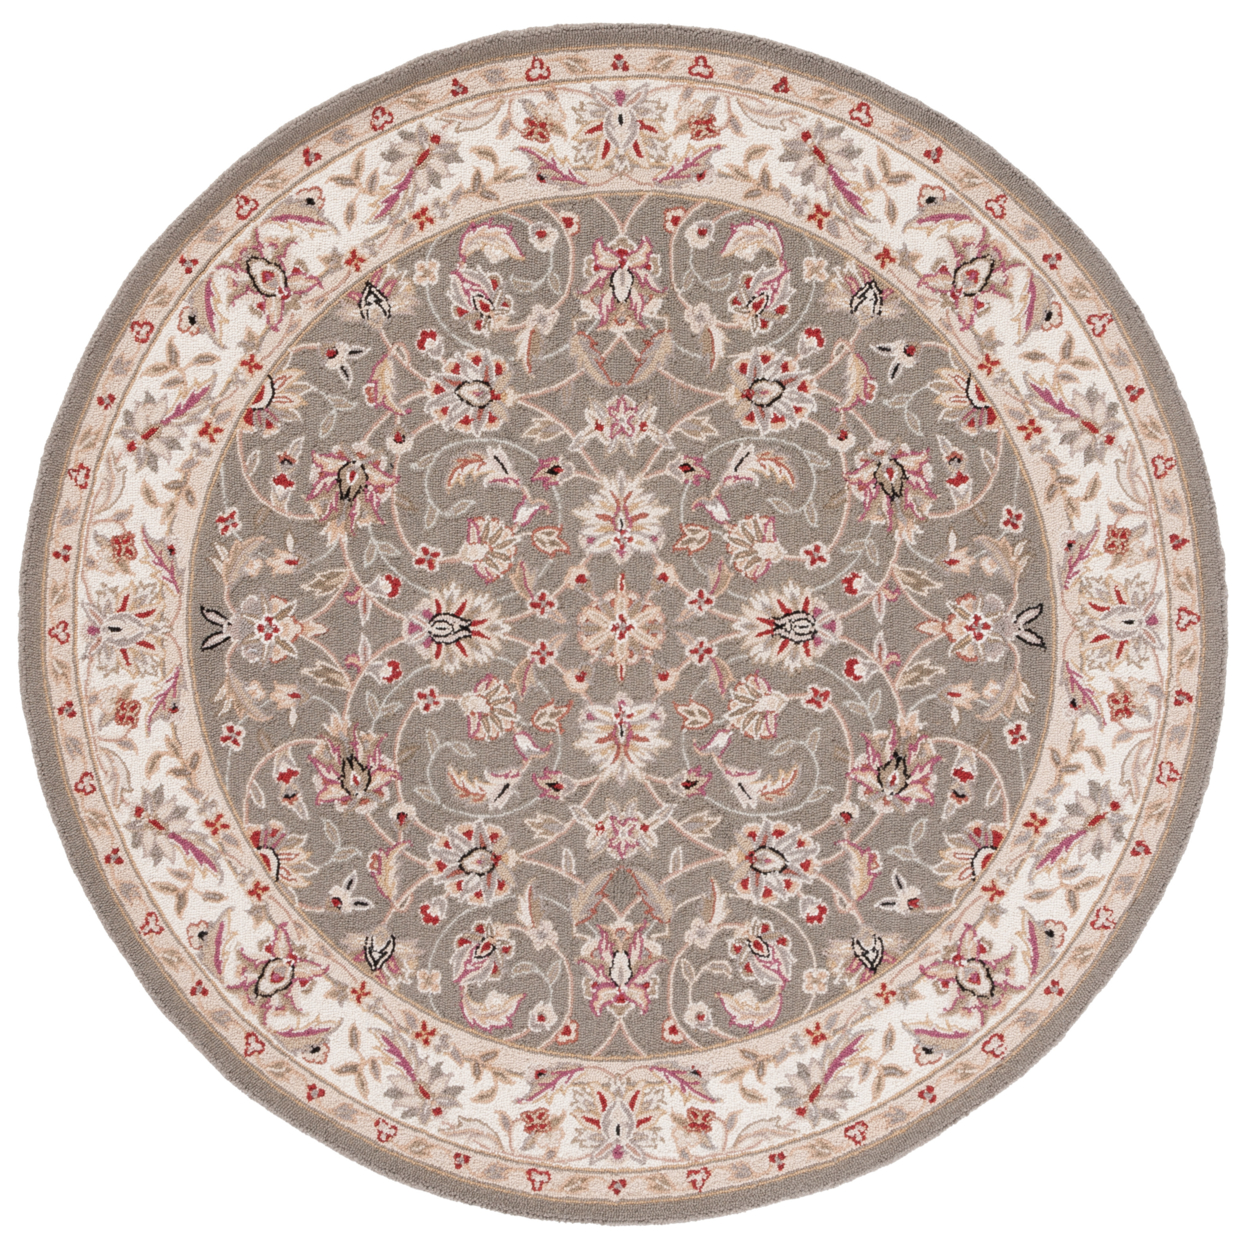 SAFAVIEH Chelsea HK78D Hand-hooked Taupe / Ivory Rug - 3' Round